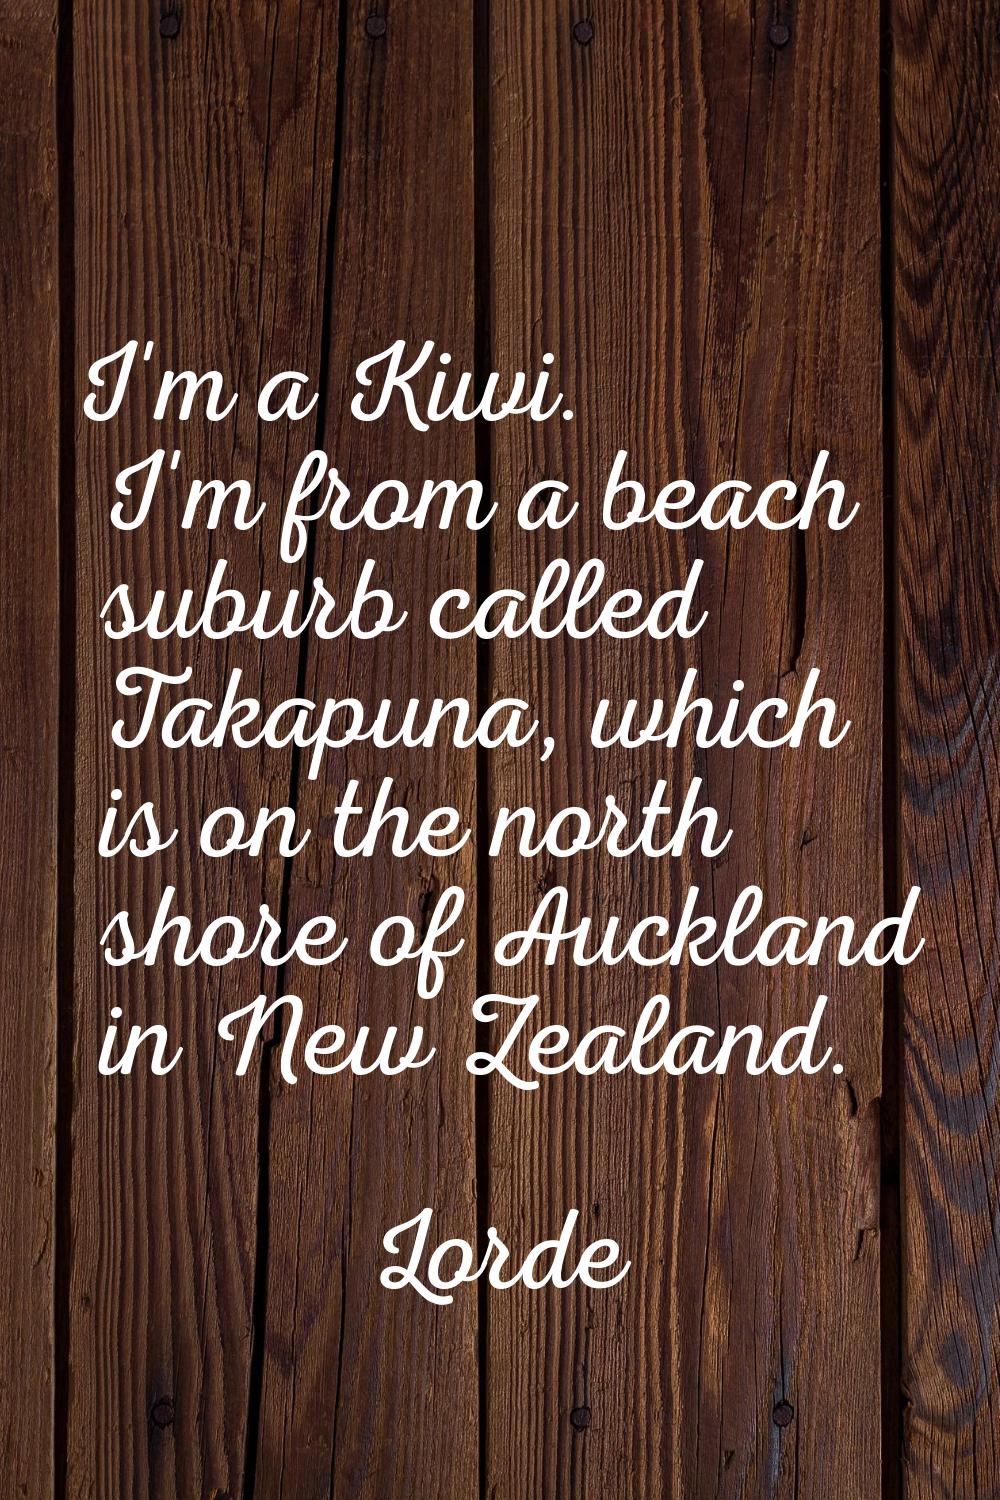 I'm a Kiwi. I'm from a beach suburb called Takapuna, which is on the north shore of Auckland in New